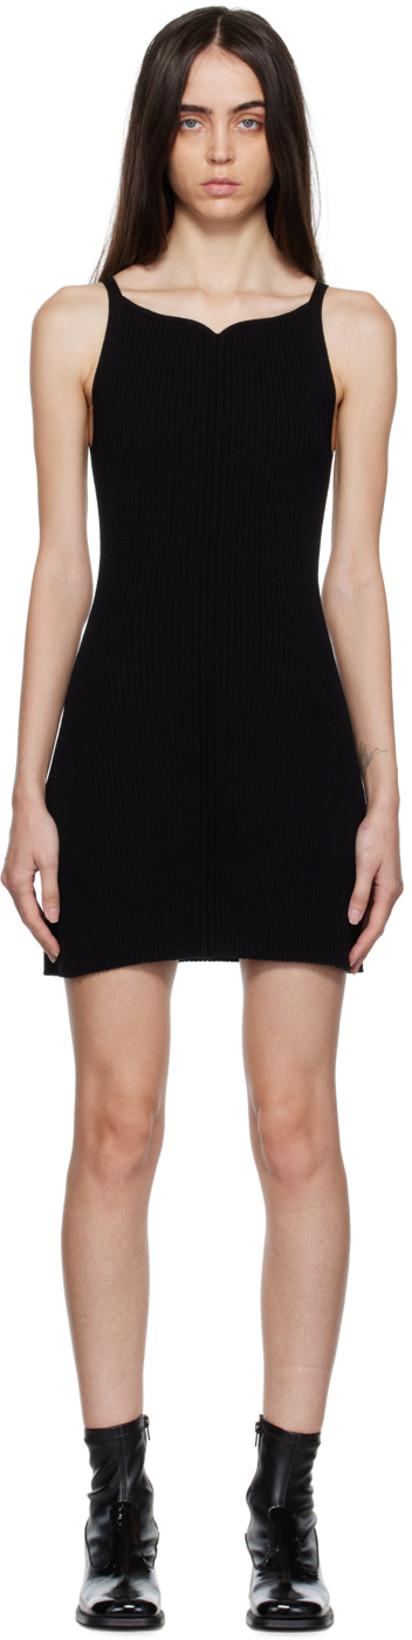 Black Swallow Minidress by COURREGES